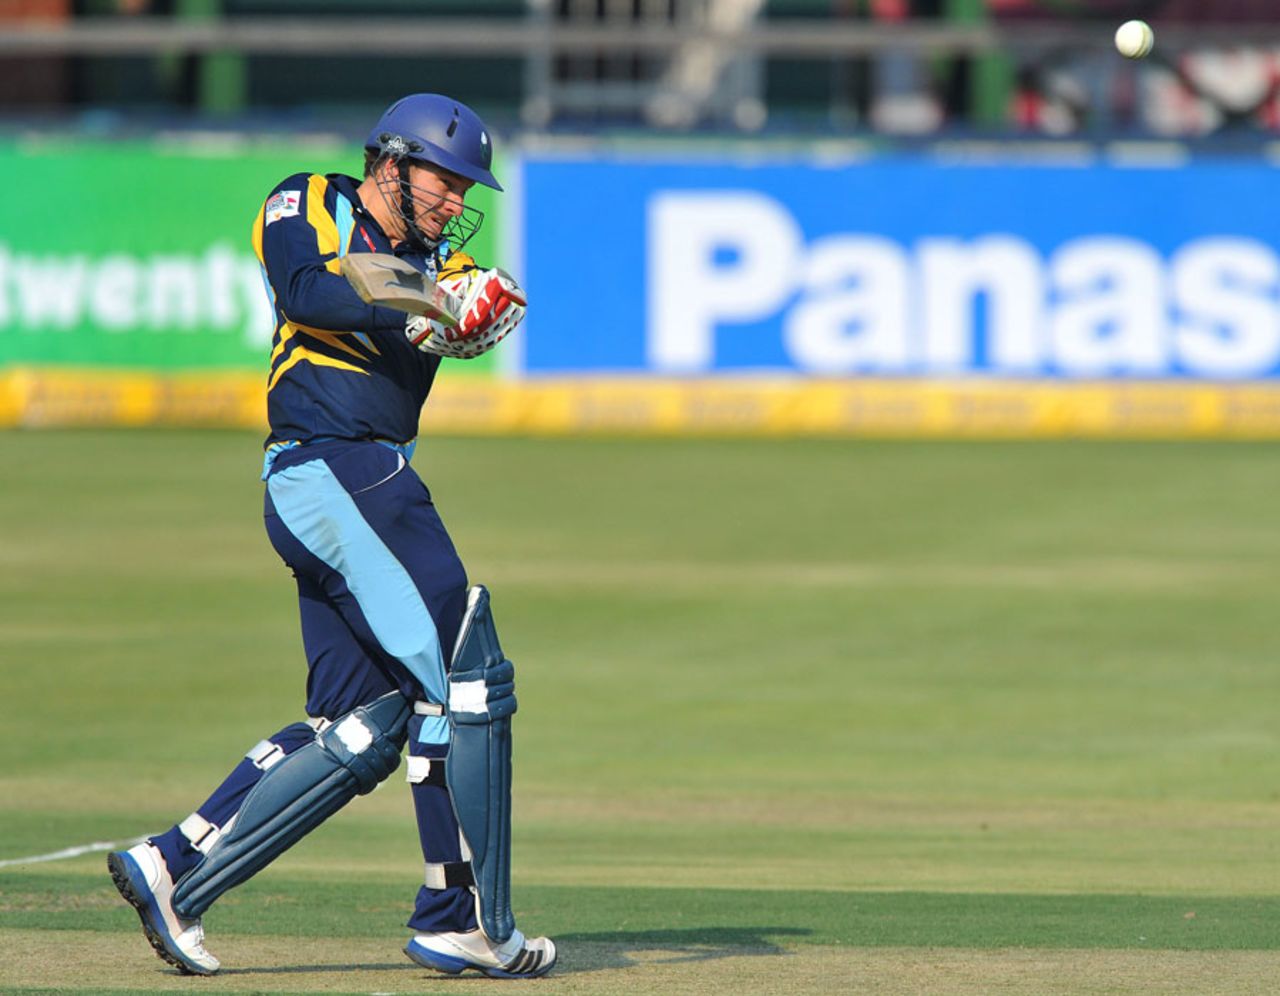 David Miller struck four fours and a six in his match-winning innings, Uva v Yorkshire, Champions League T20, Qualifying Tournament Pool 2, Johannesburg, October, 9, 2012